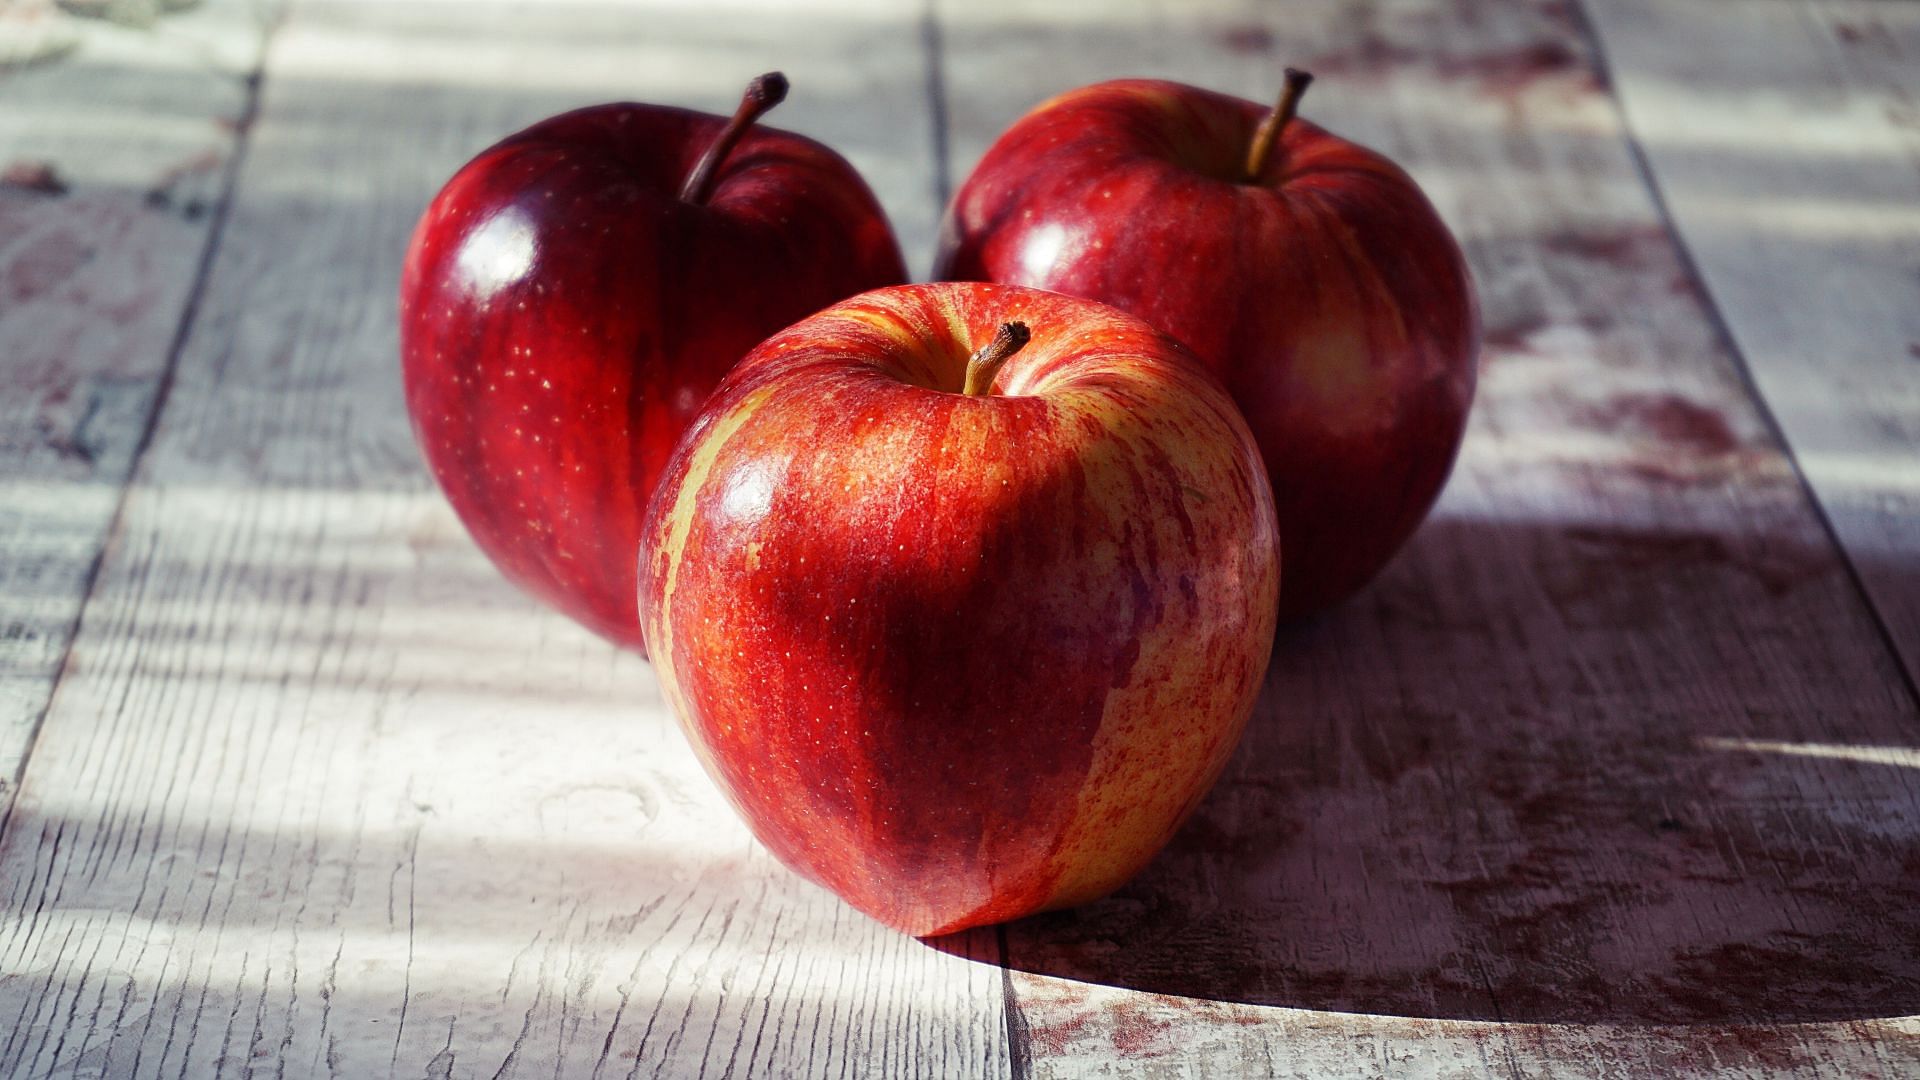 How many calories are in apples? (Image via Pexels/ Suzy Hazelwood)